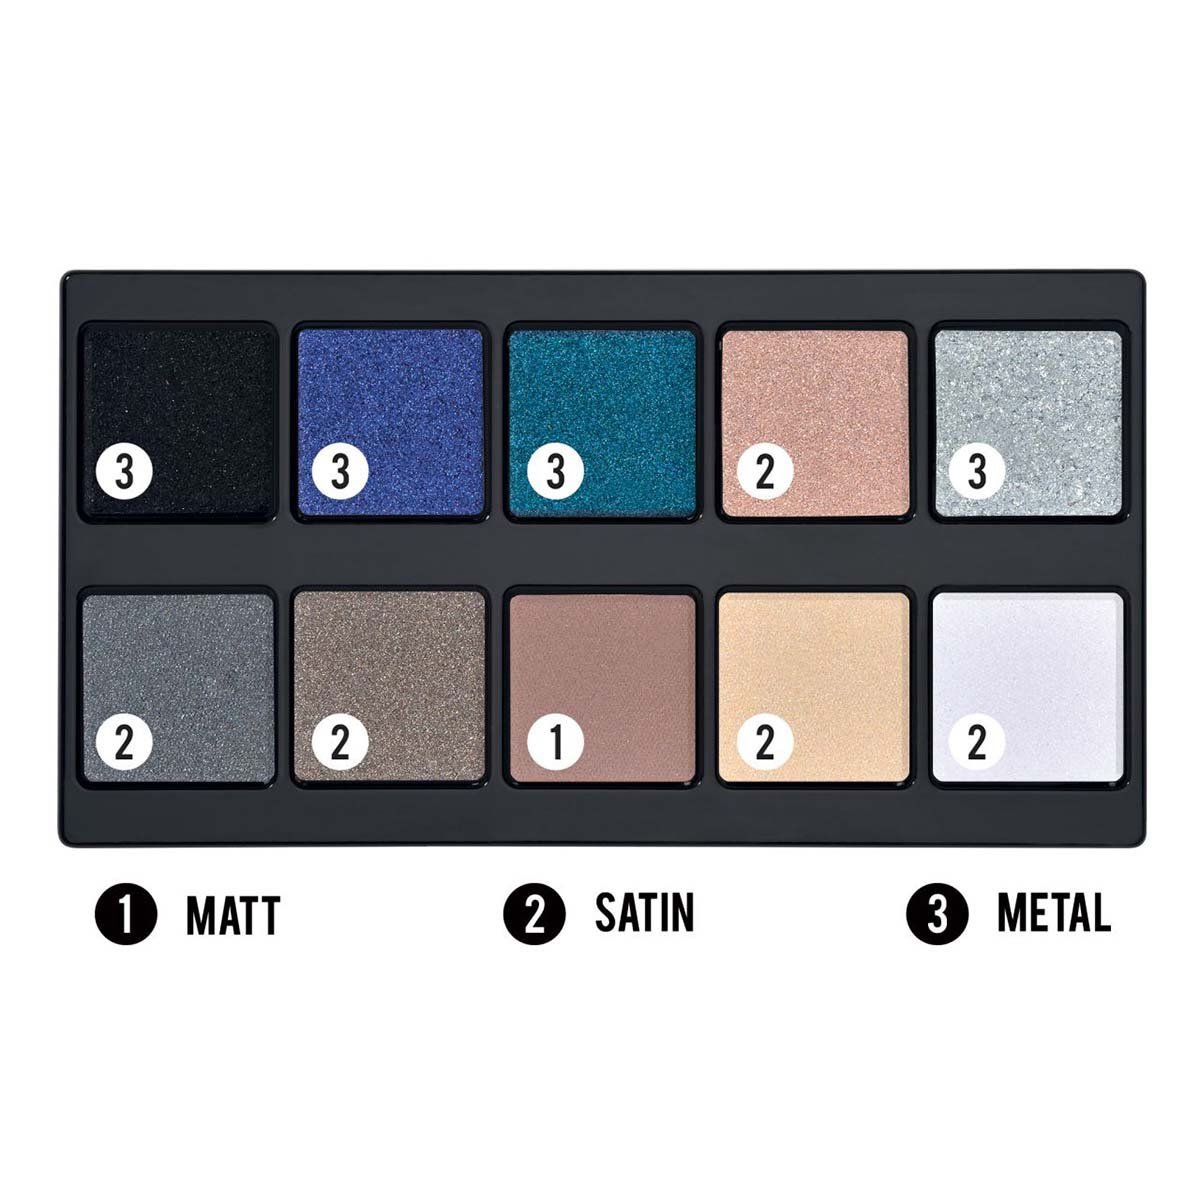 Sombra Pupa Make Up Stories Palette Cosmic